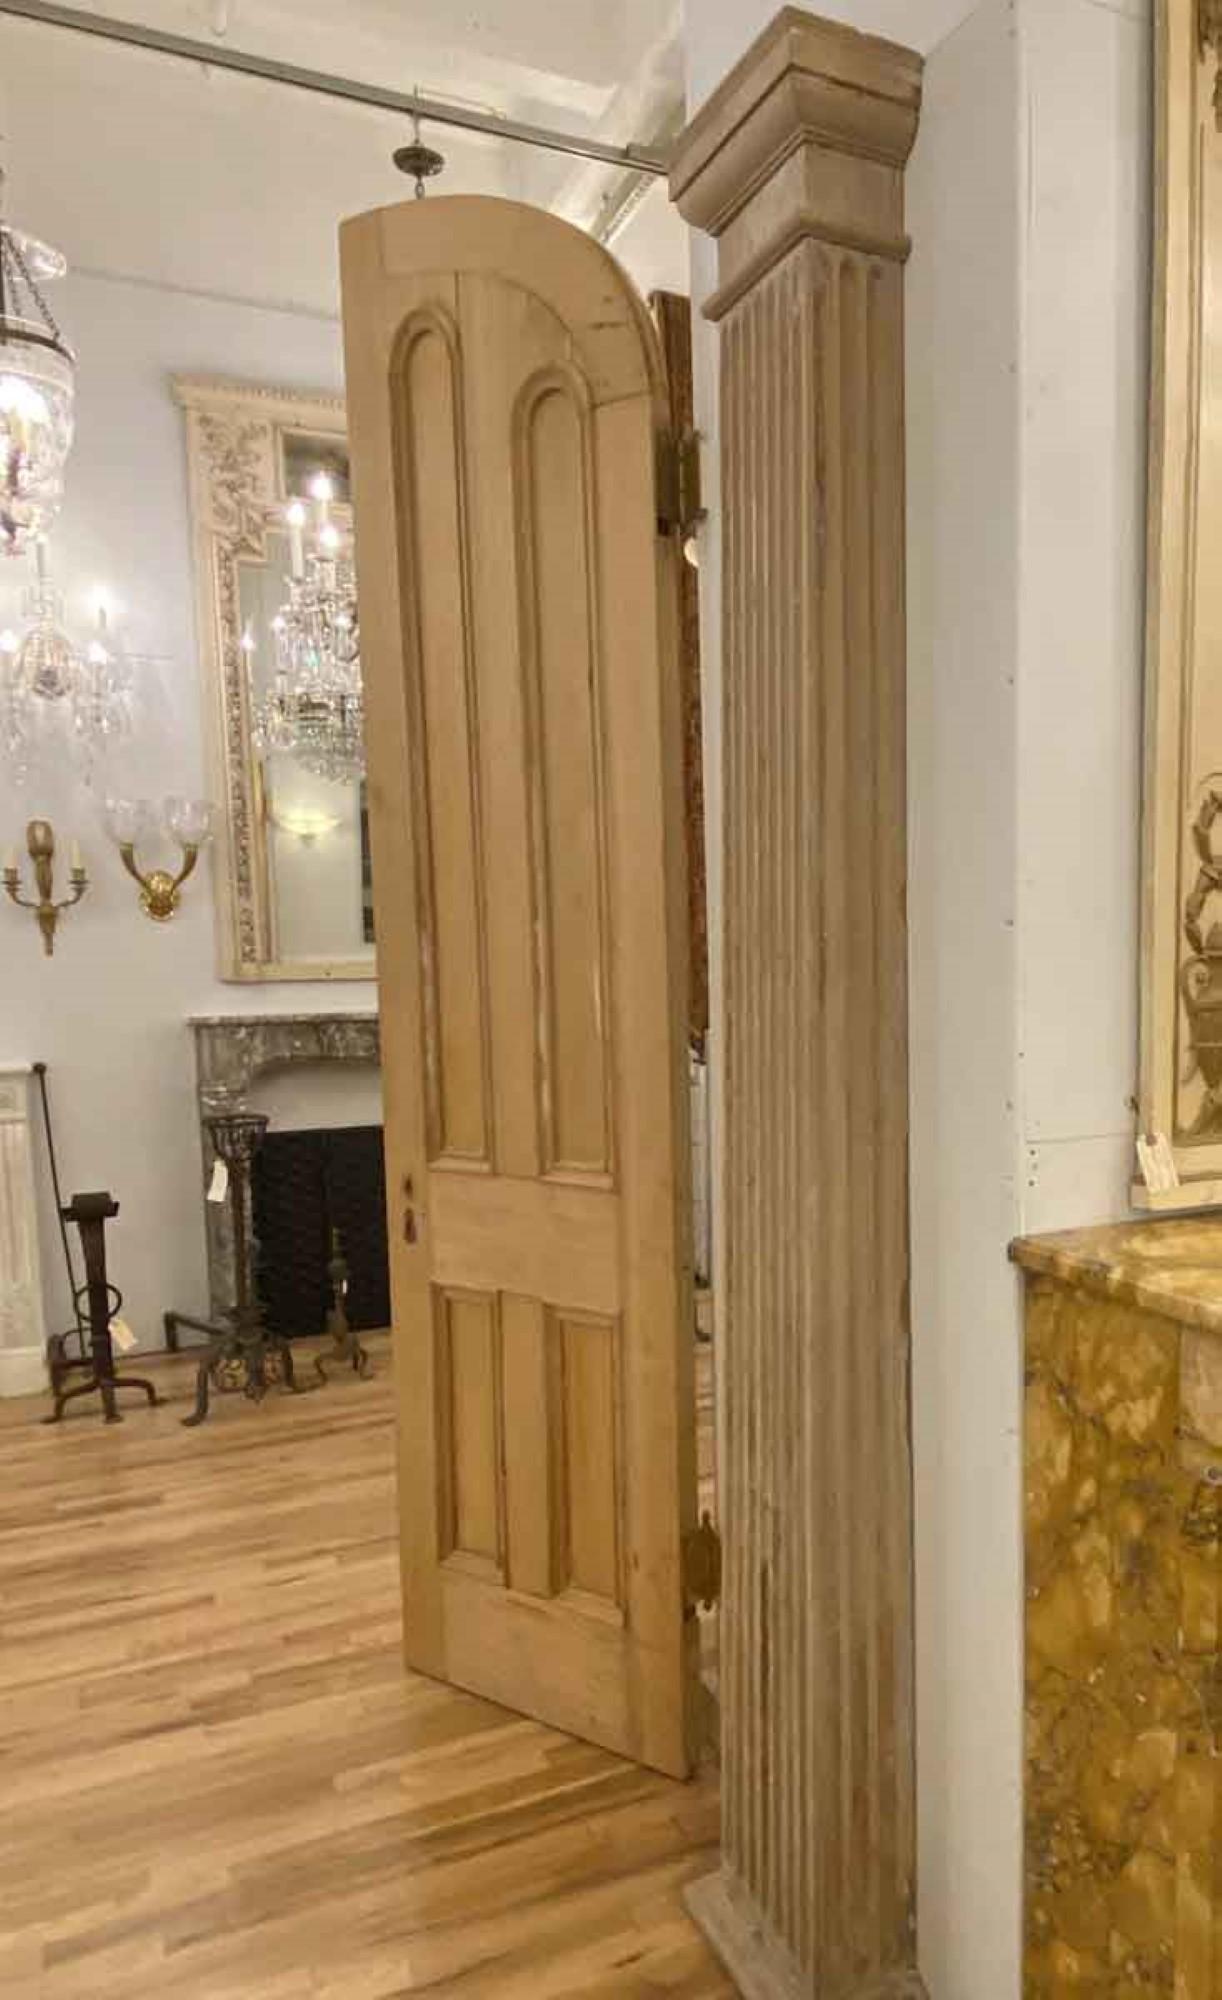 This pair of antique half square fluted pilasters are made of heart pine. Their nice wood grain has been revealed having been almost totally stripped of the paints that once covered it. They have a nice light tone, and a Doric Order capital. These